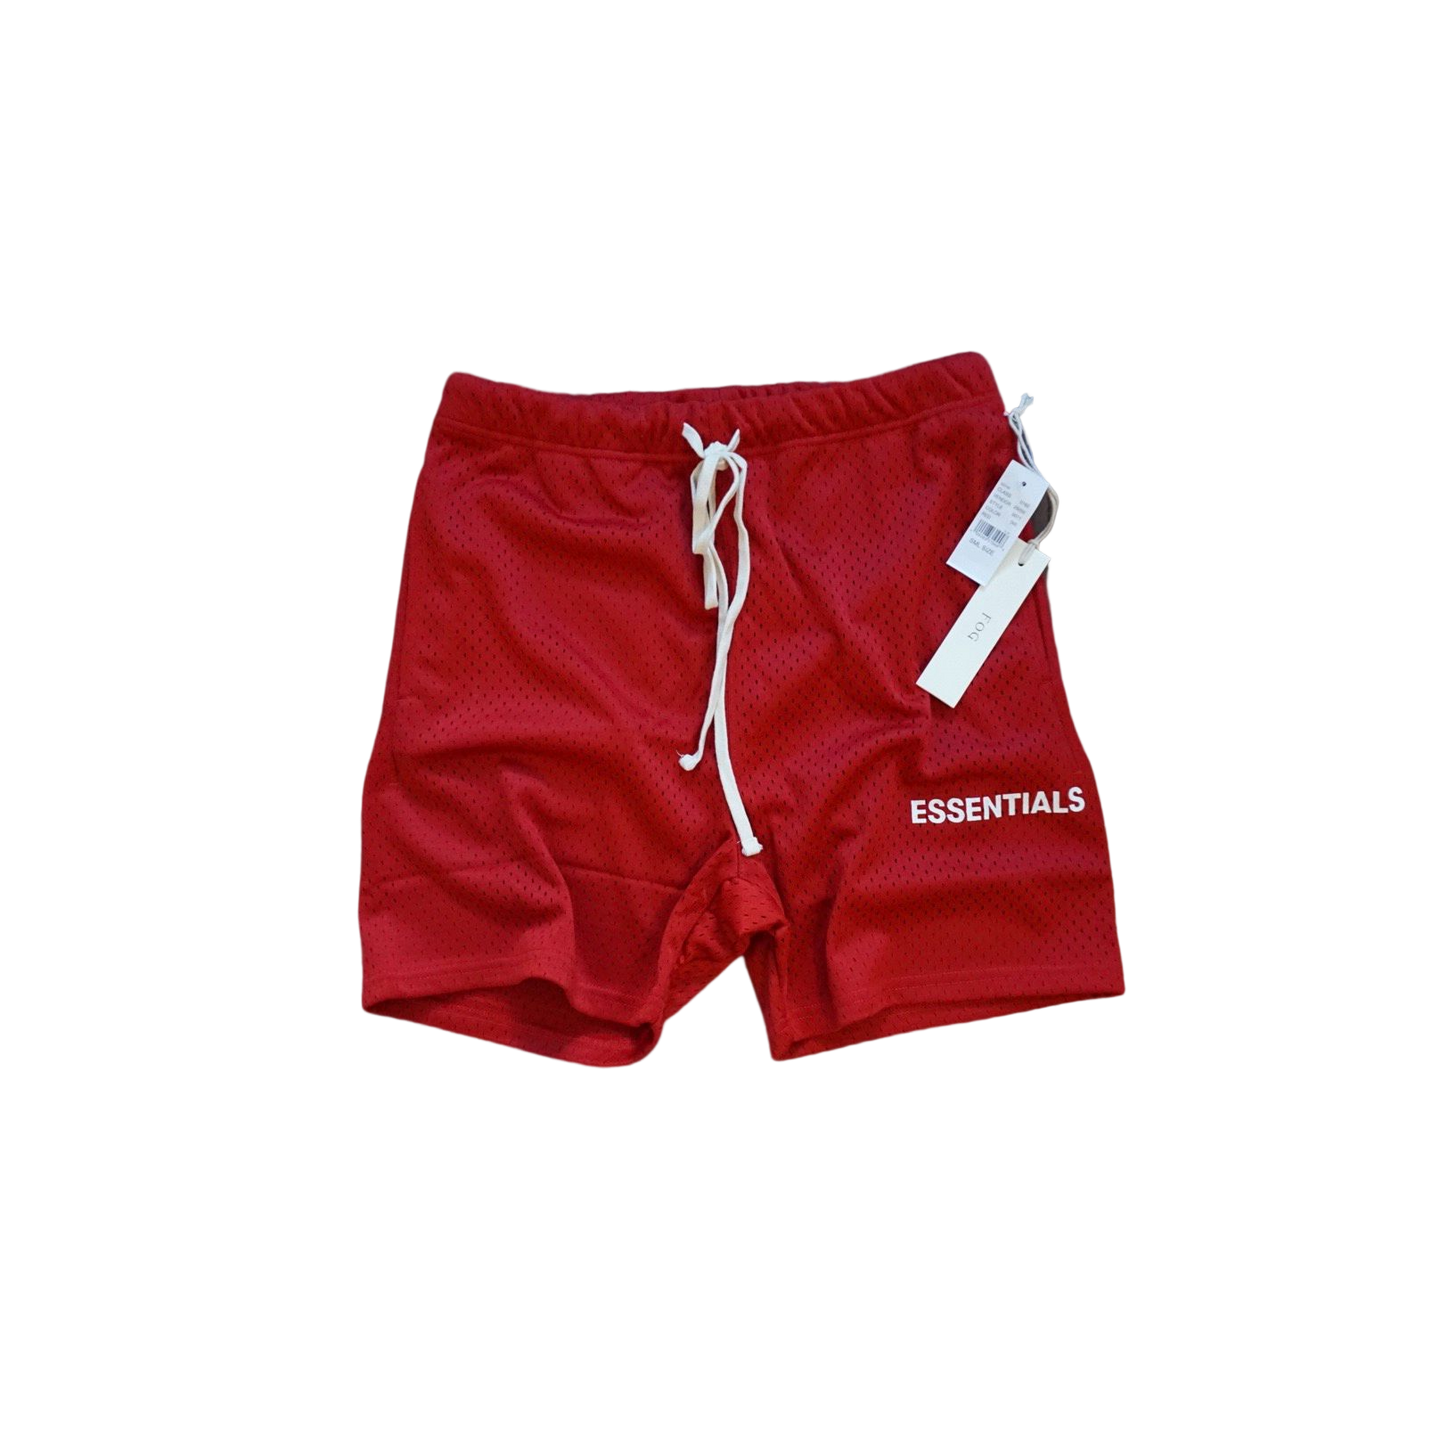 Fear of God Essentials Graphic Mesh Drawstring Shorts - Red